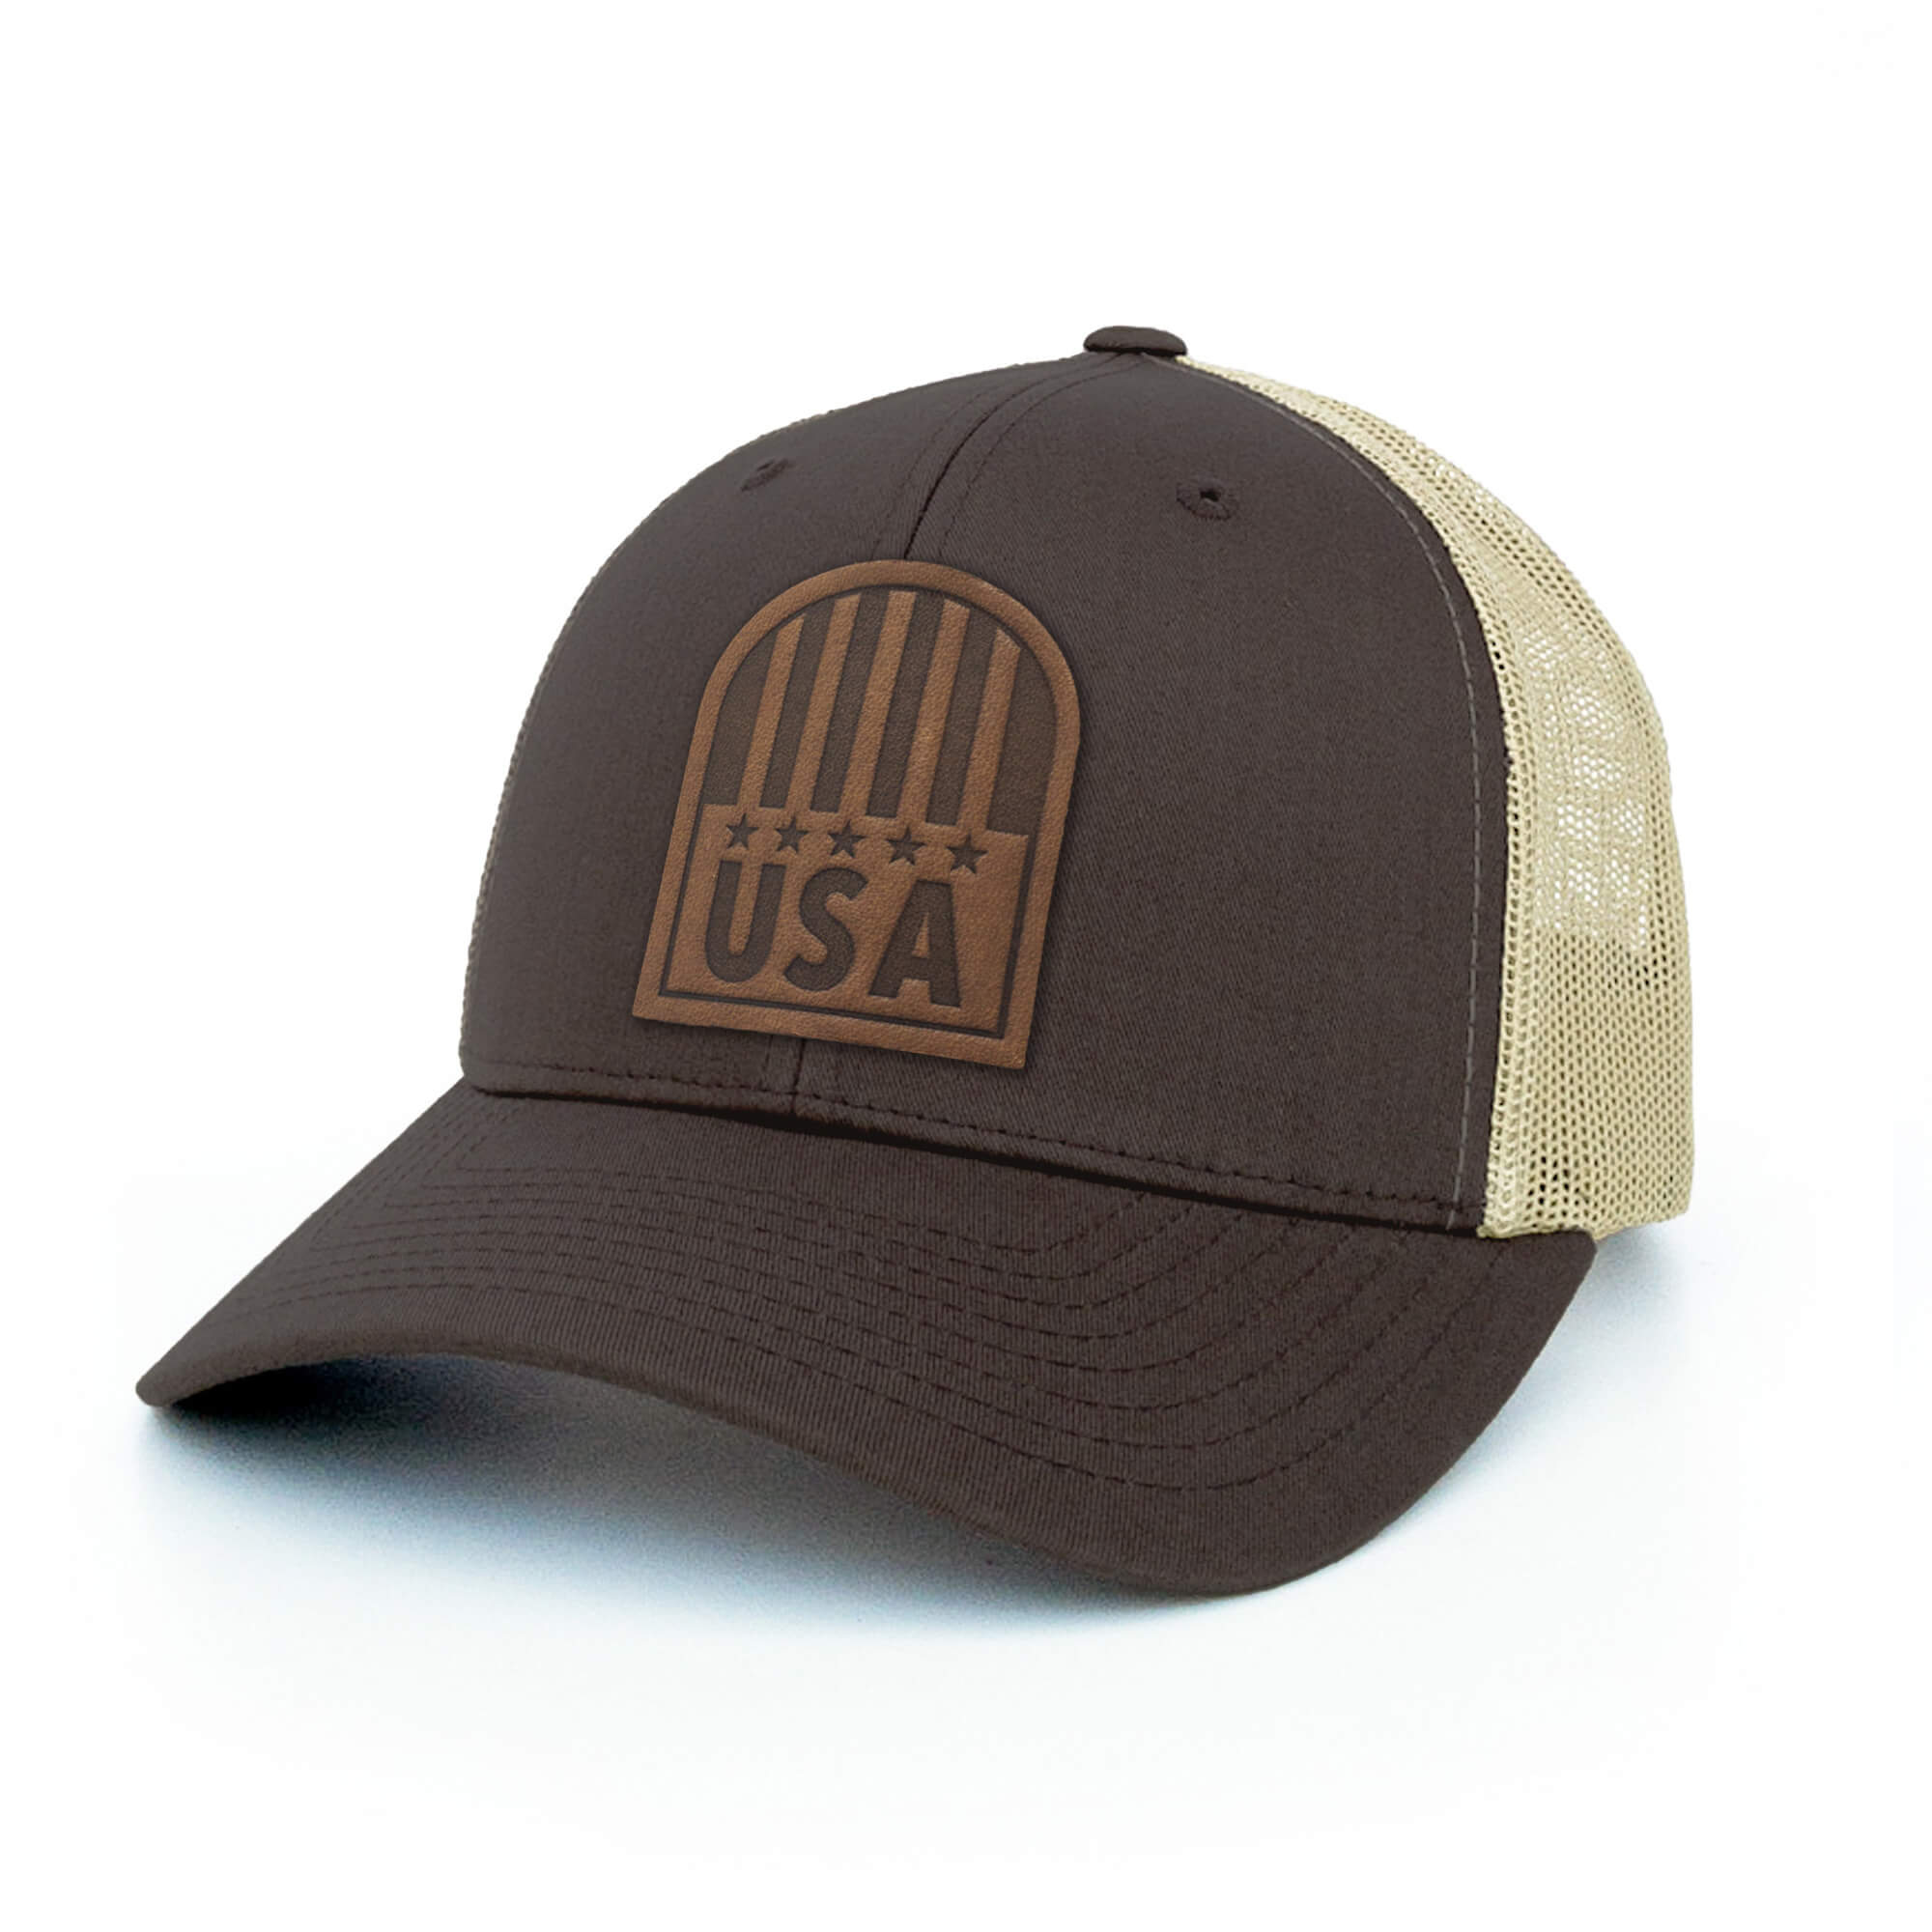 Brown and khaki trucker hat with full-grain leather patch of USA Crest | BLACK-003-013, CHARC-003-013, NAVY-003-013, HGREY-003-013, MOSS-003-013, BROWN-003-013